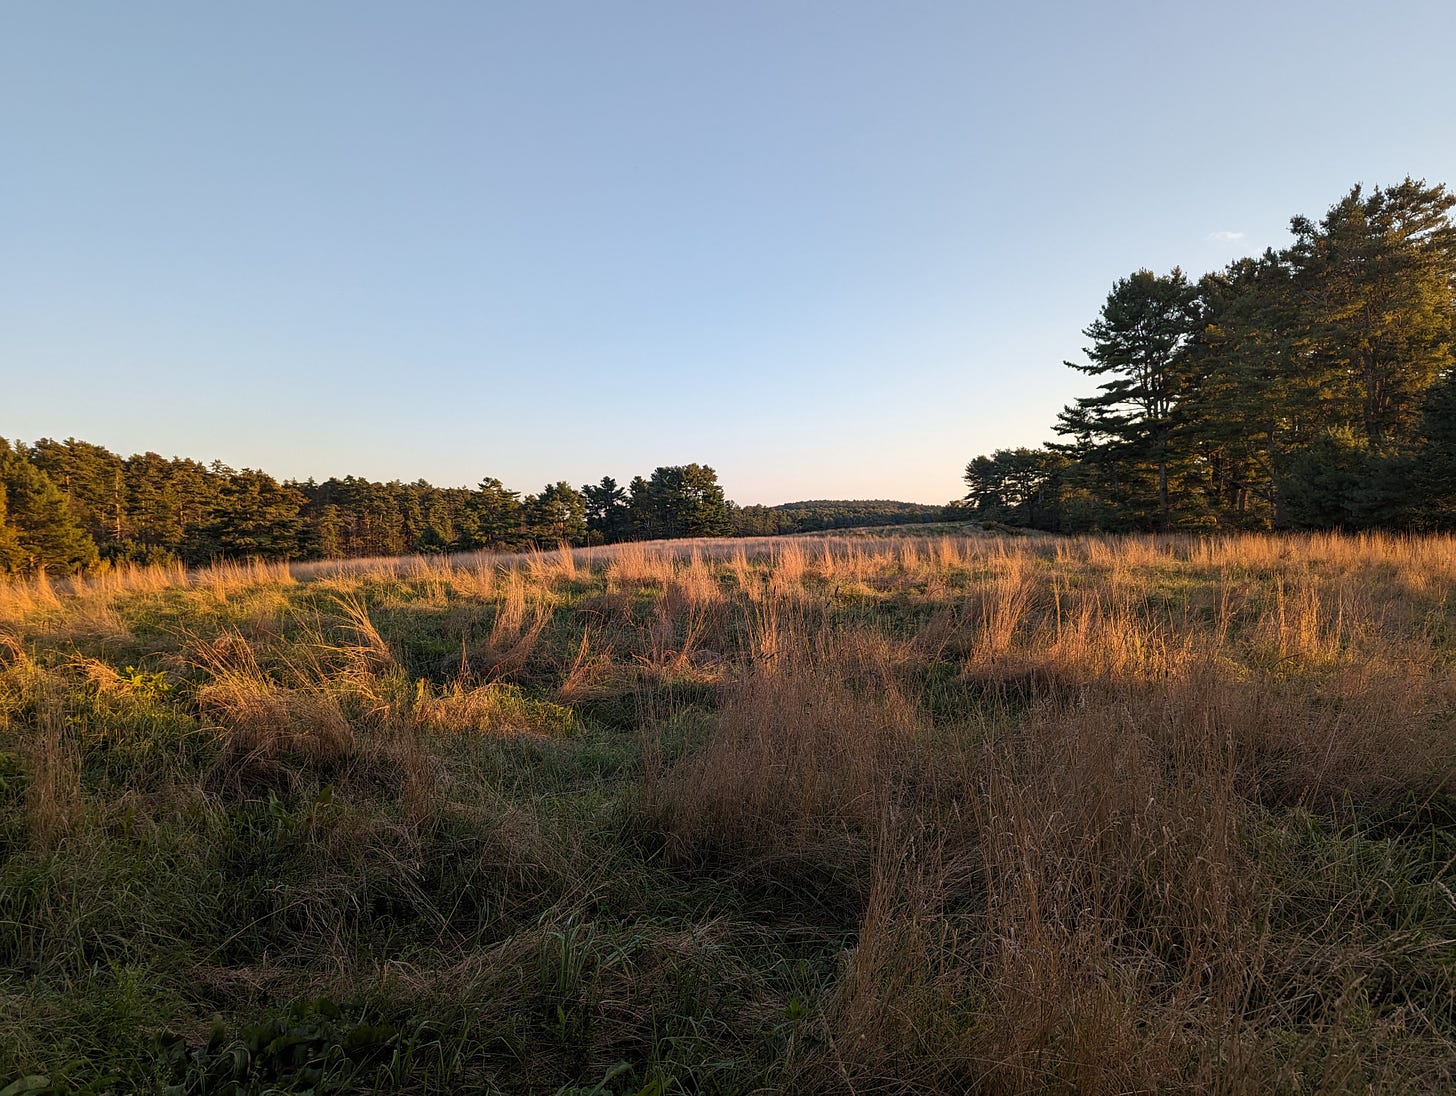 A photo of an empty field at sunset